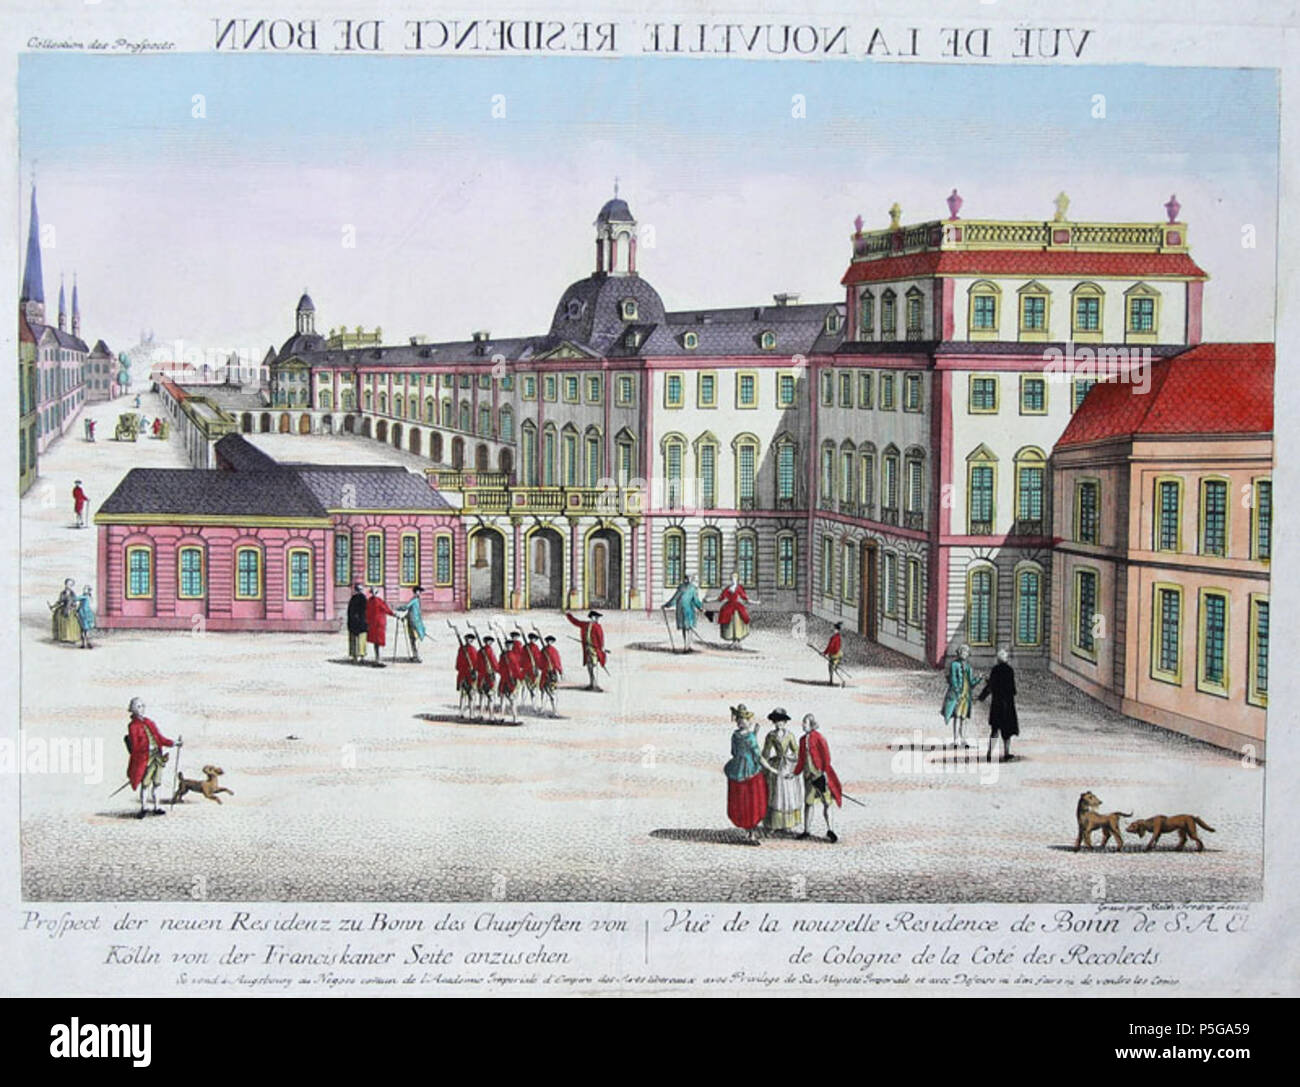 N/A. English: Lateral view of the new residenz of the Elector of Cologne at Bonn. The Elector's former residenz had been destroyed by fire in 1777. Engraving by Balthasar Friedrich Leizel. 1780s.   Balthasar Friedrich Leizel  (1727–1802)    Alternative names Balthasar Friedrich Leizelt  Description German copperplate engraver  Date of birth/death circa 1727 after 1802  Work location Augsburg  Authority control  : Q18507912 VIAF:26145542358496640955 ISNI:0000 0004 5619 7551 LCCN:no98080960 GND:10375850X SUDOC:183682351 WorldCat 221 Bonn Residenz Leizel Stock Photo